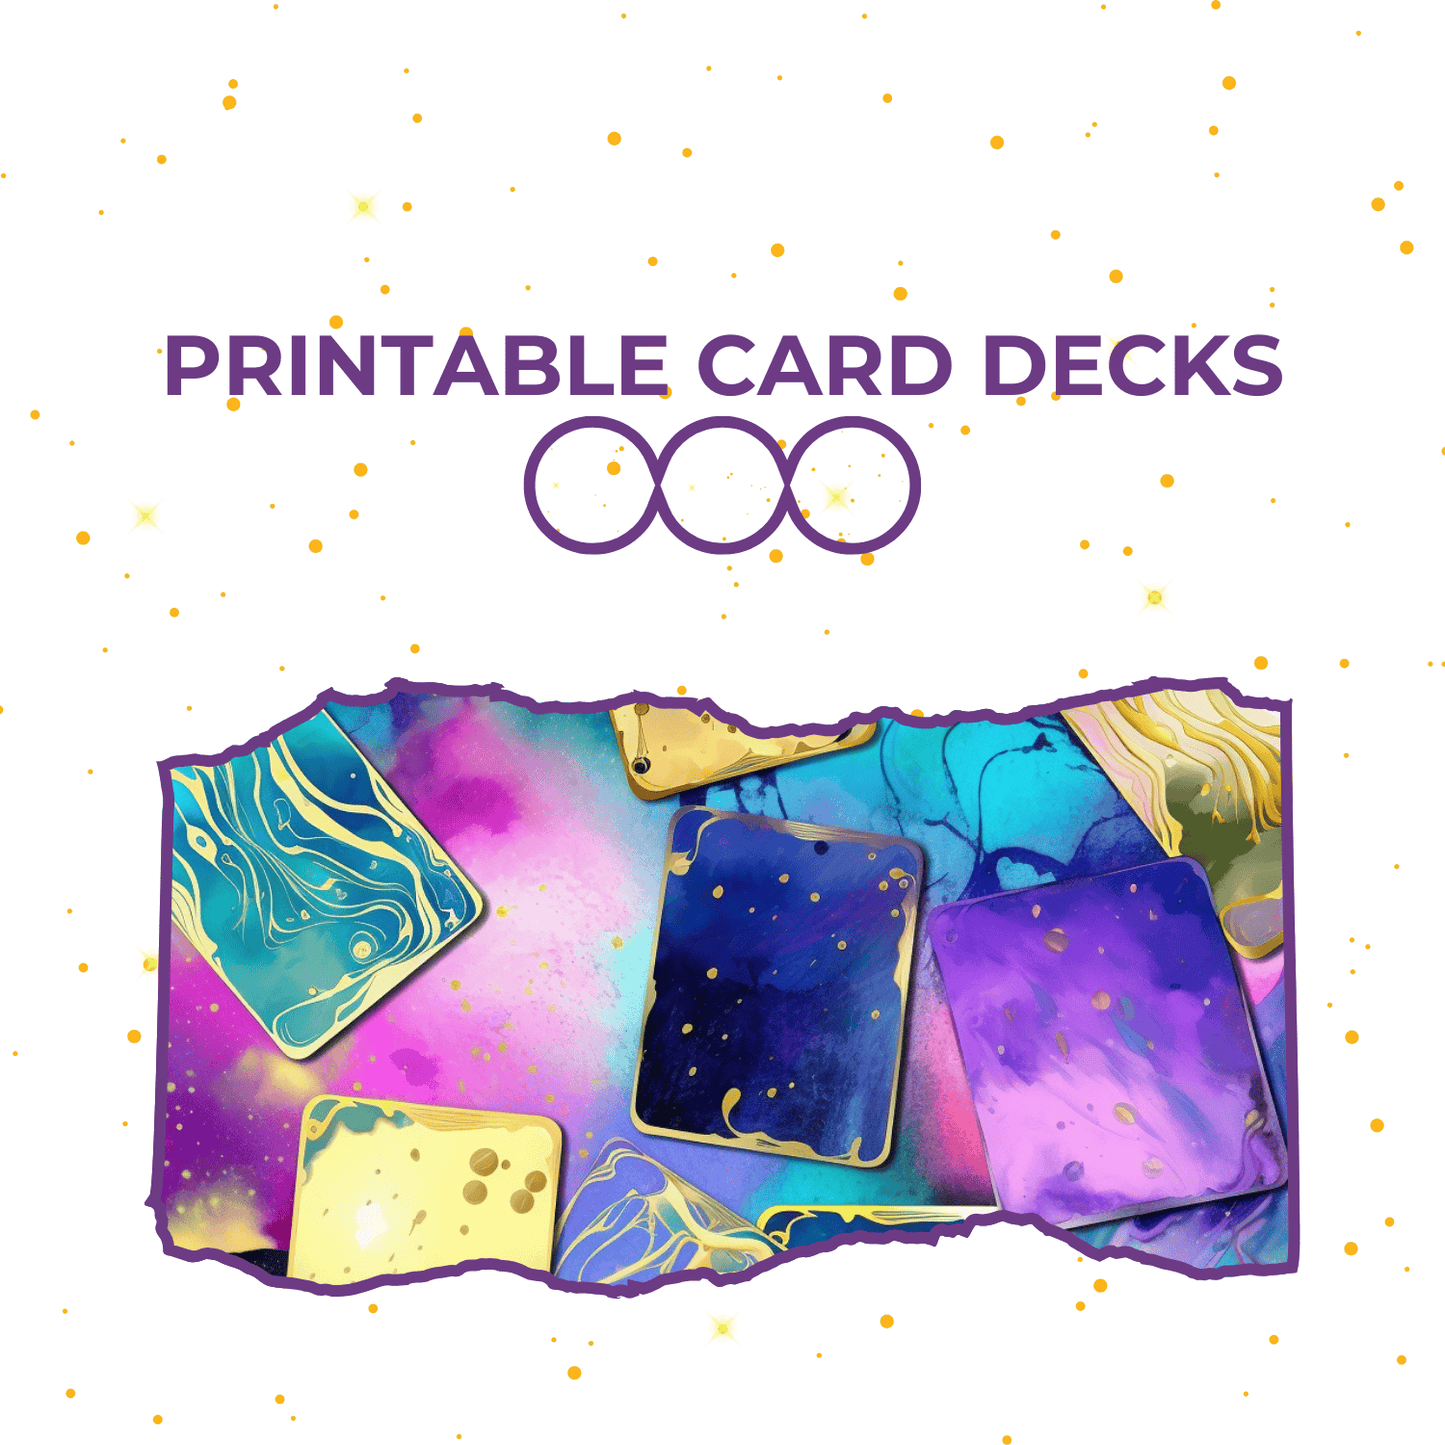 Title image for the Printable Card Decks Category with gold polka dots, purple text, and an image of neon colored swirls and cards tossed on the surface_Polka Dot Patty Shop